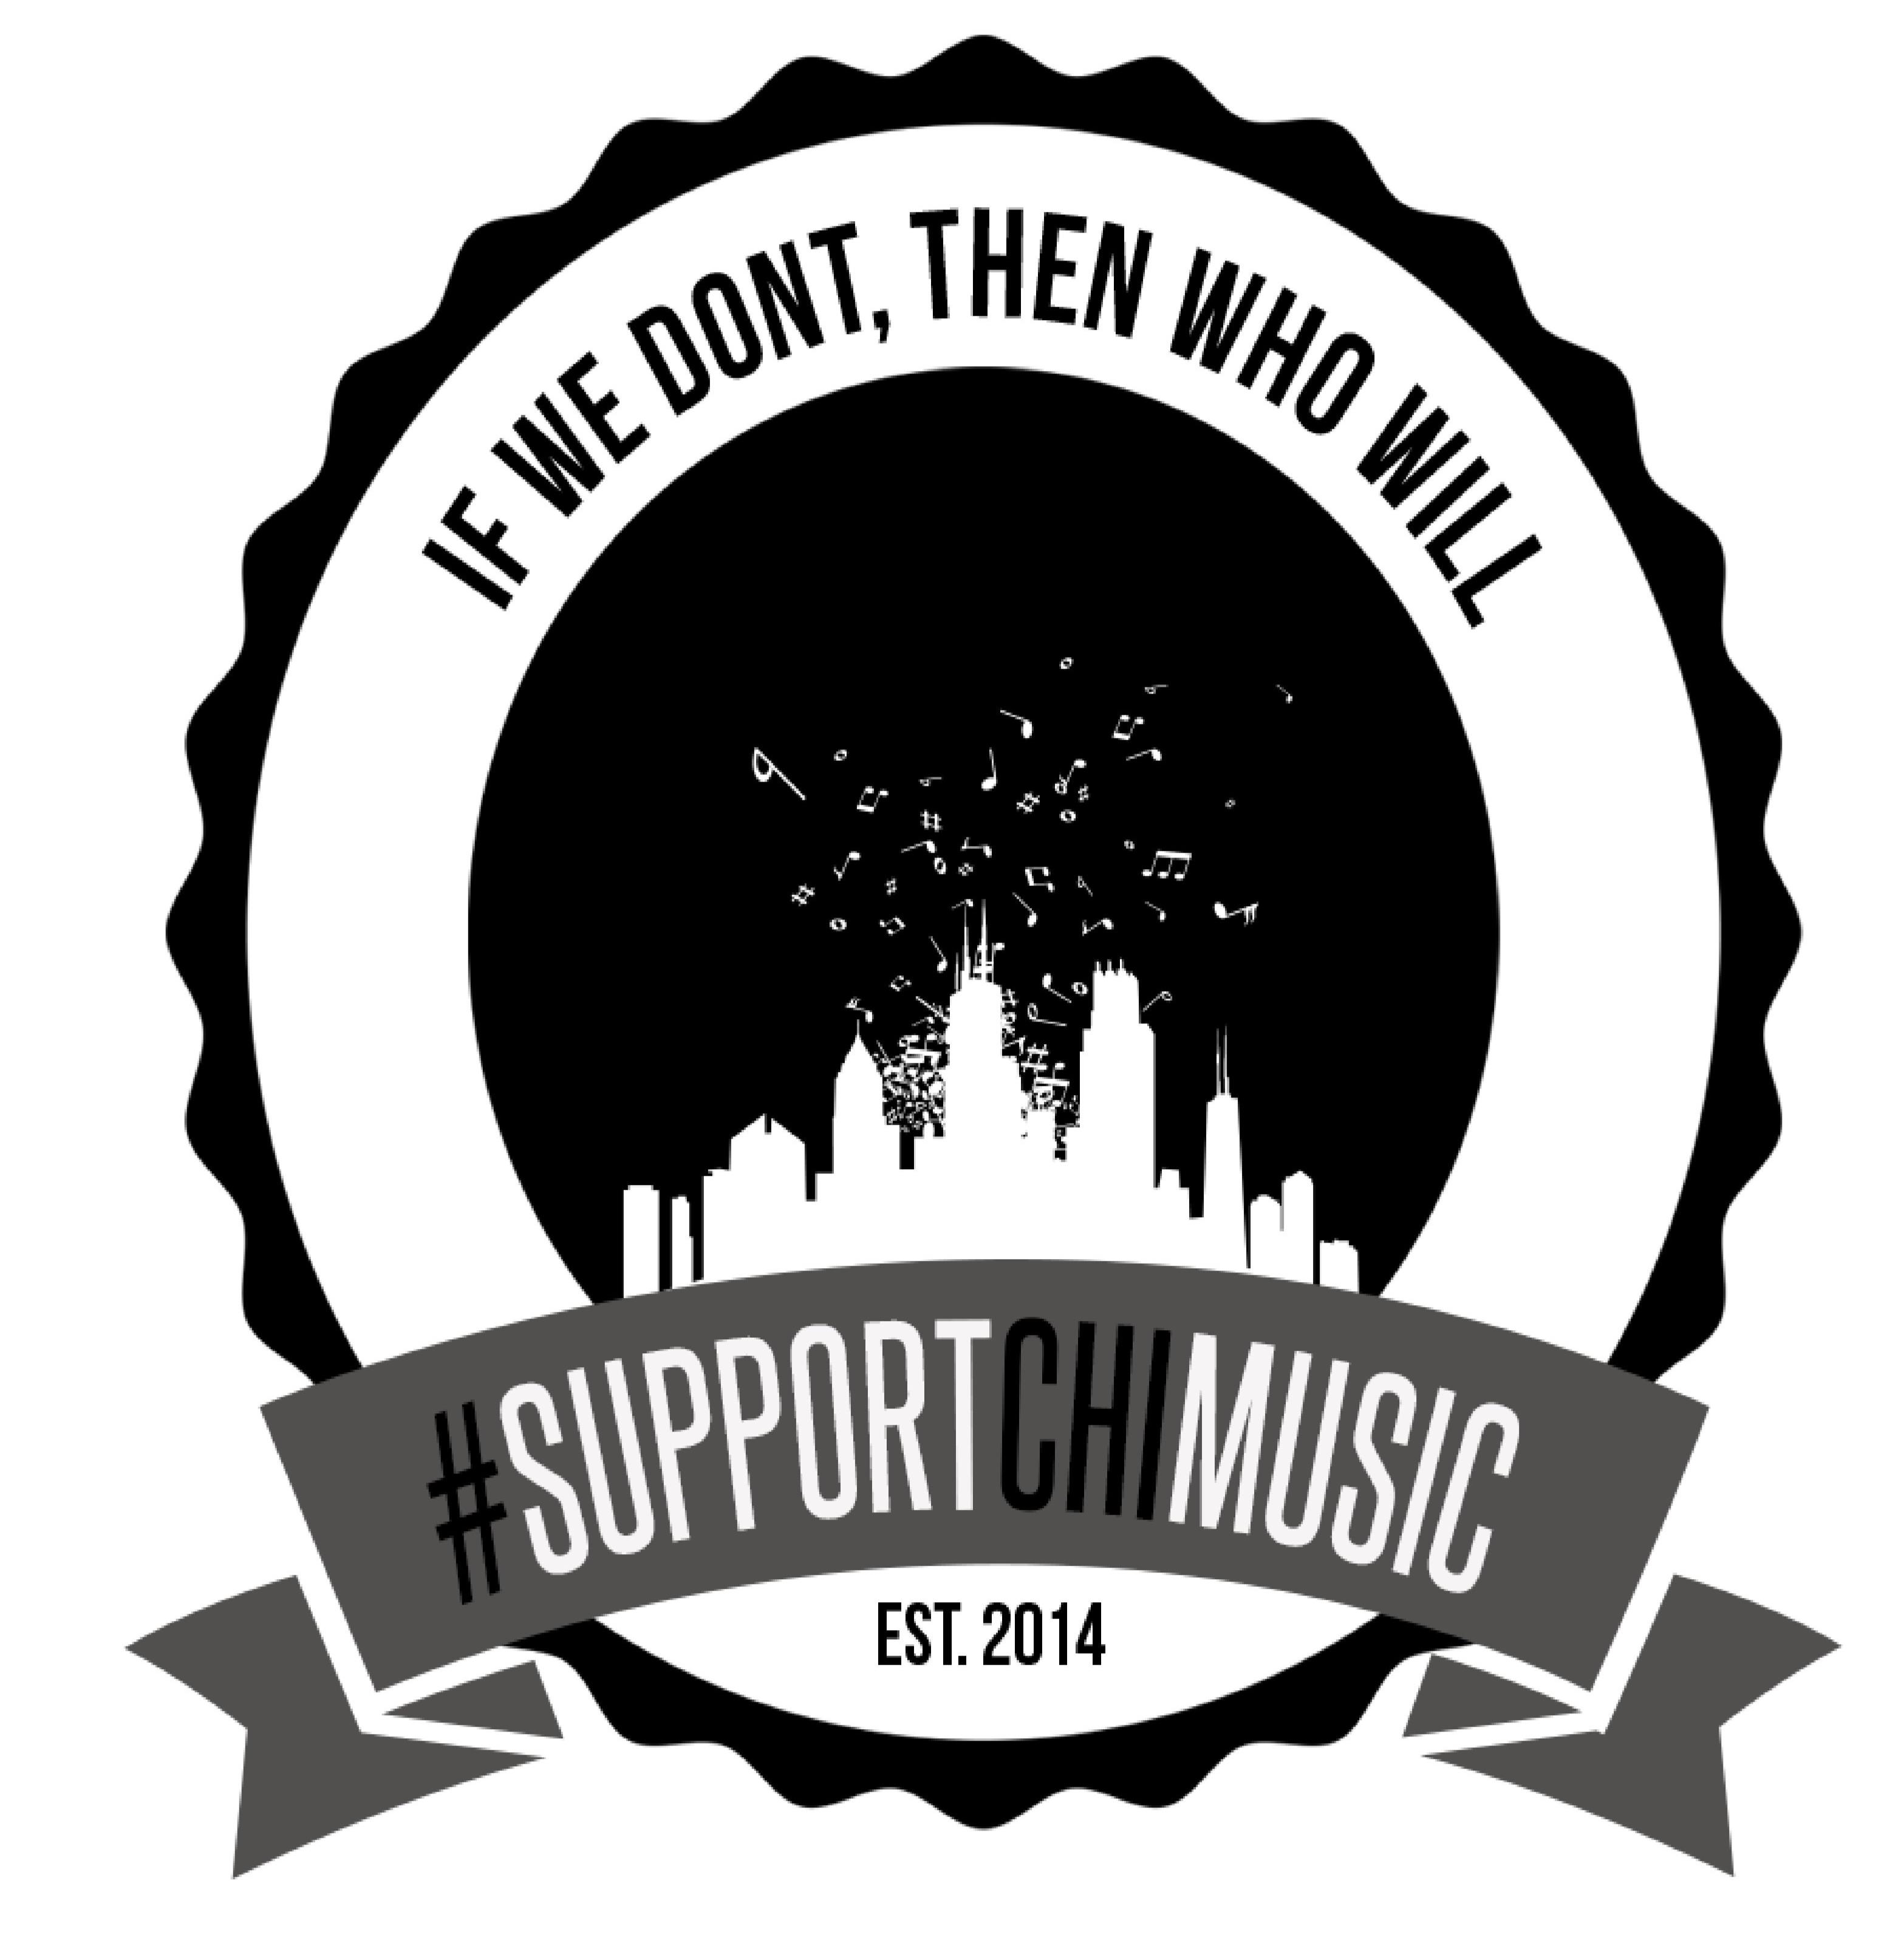  IF WE DONT, THEN WHO WILL #SUPPORTCHIMUSIC EST. 2014